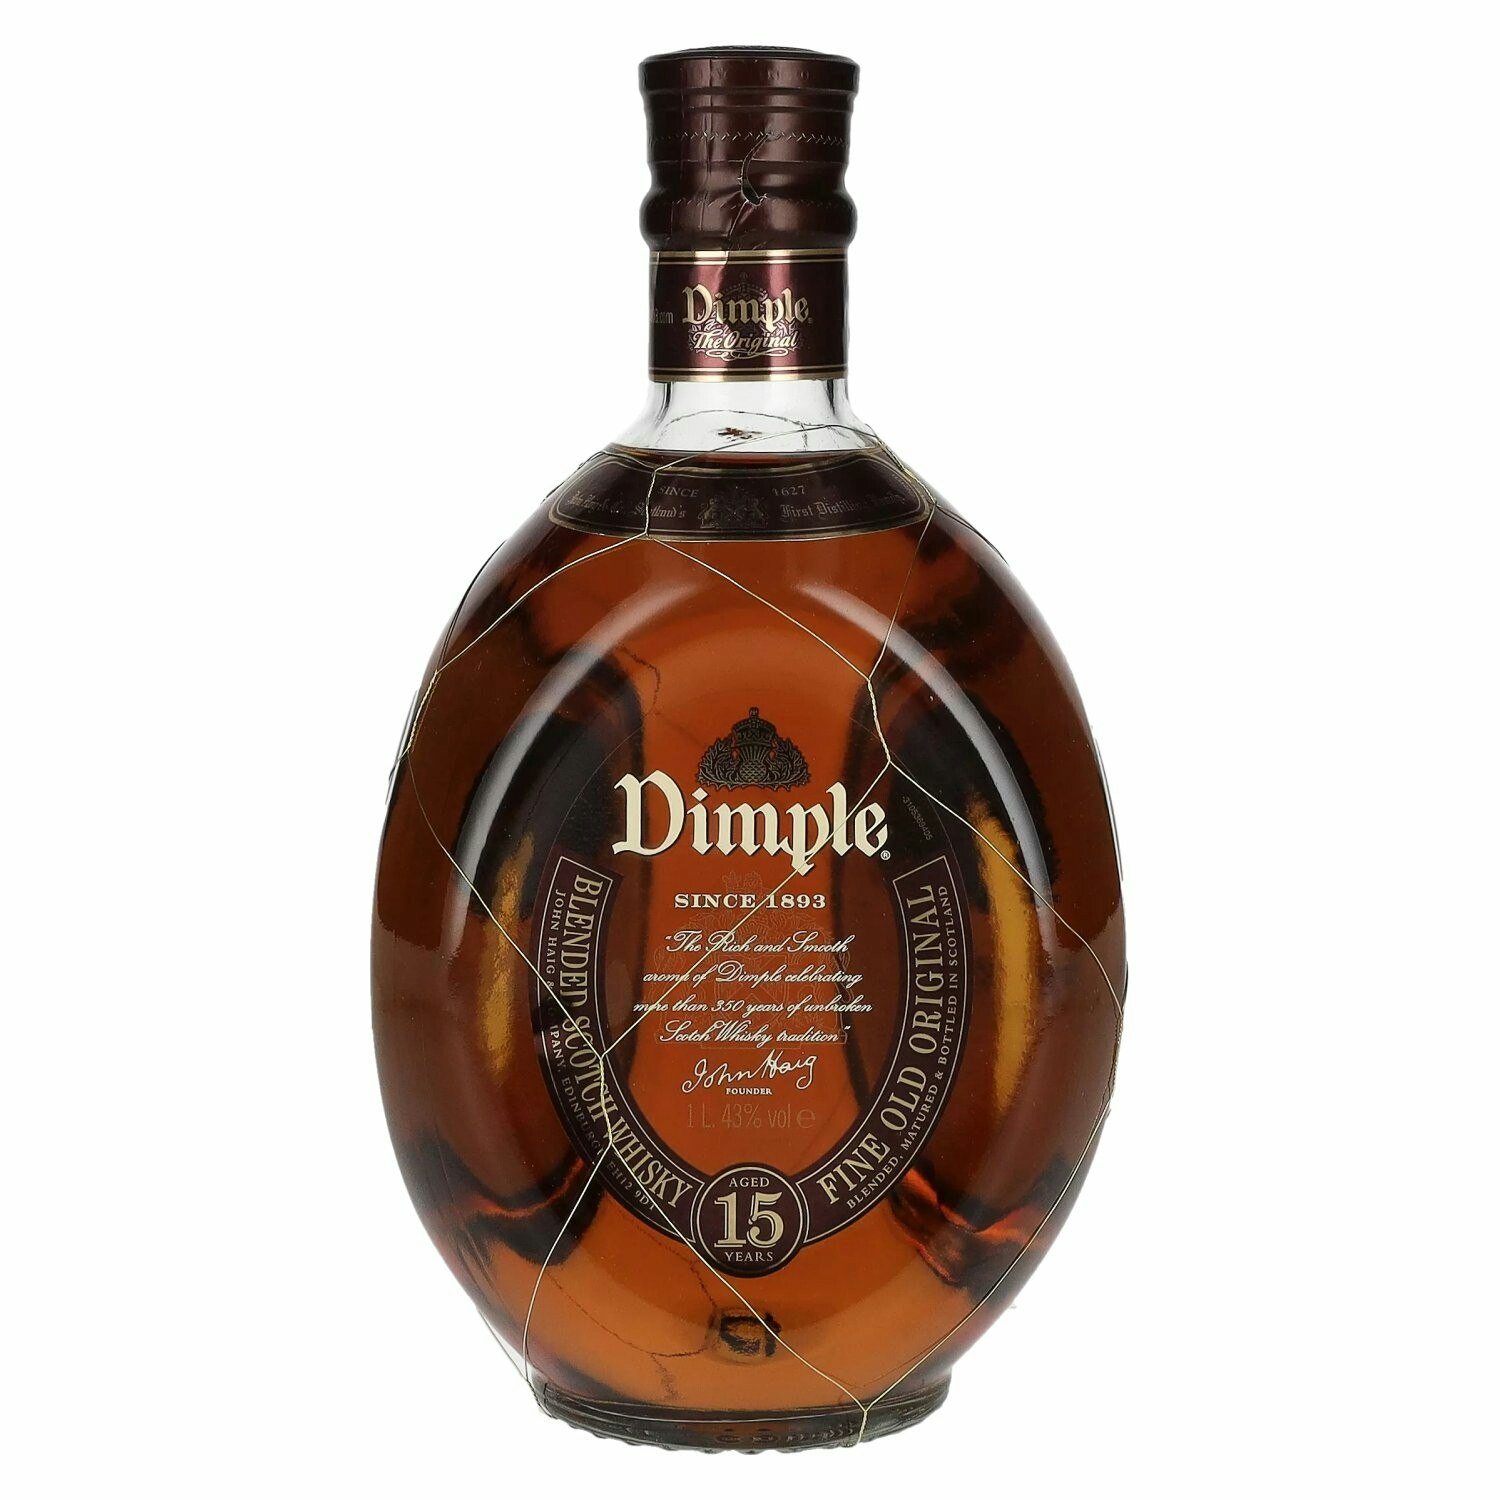 Dimple 15 Years Old Blended Scotch Whisky 43% Vol. 1l